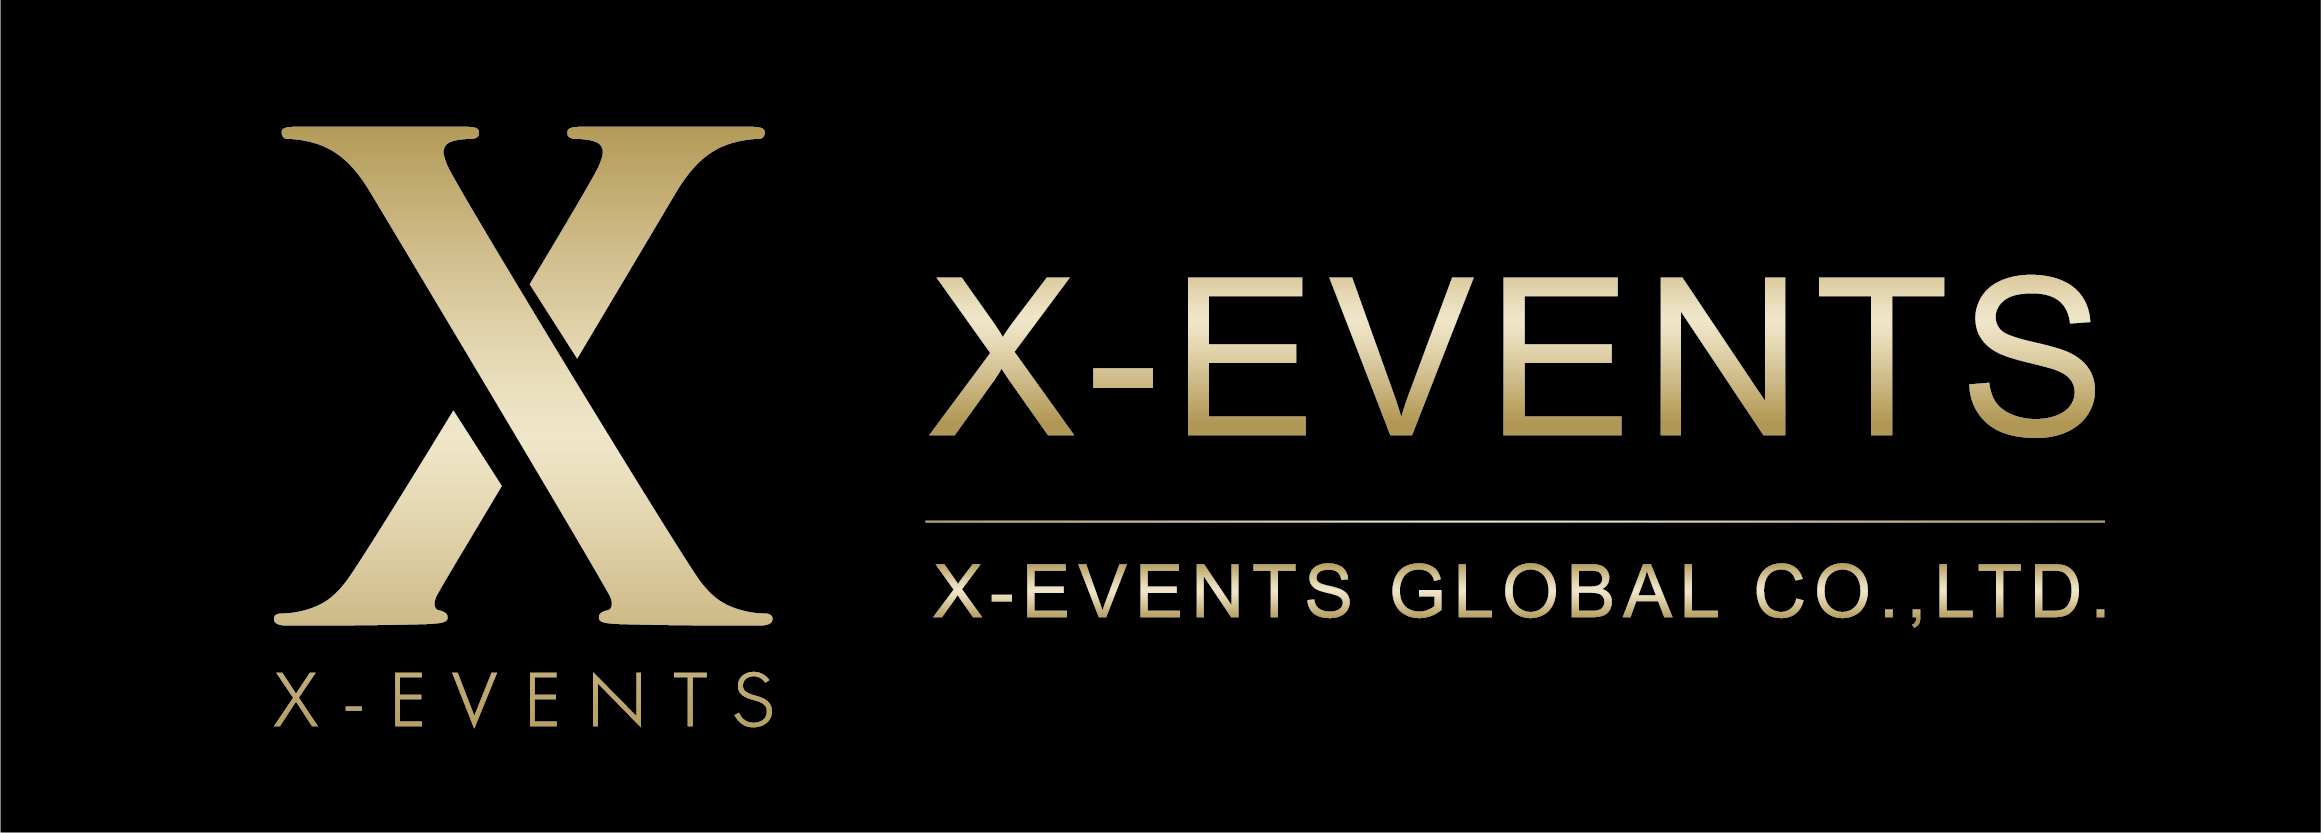 X-EVENTS